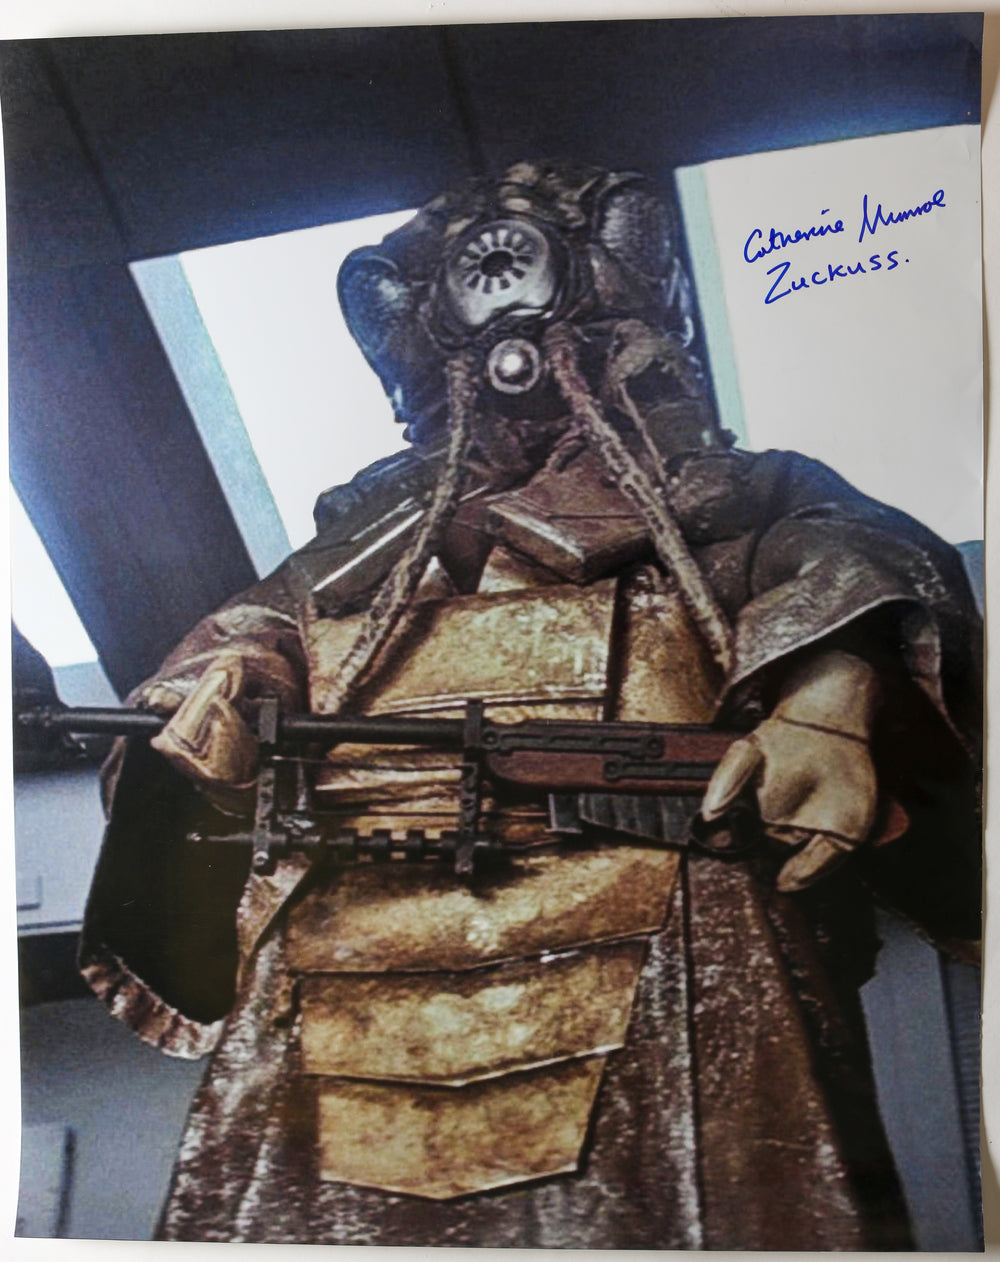 Catherine Munroe as Zuckuss Bounty Hunter in Star Wars: The Empire Strikes Back Signed 24x30 Poster with Character Name